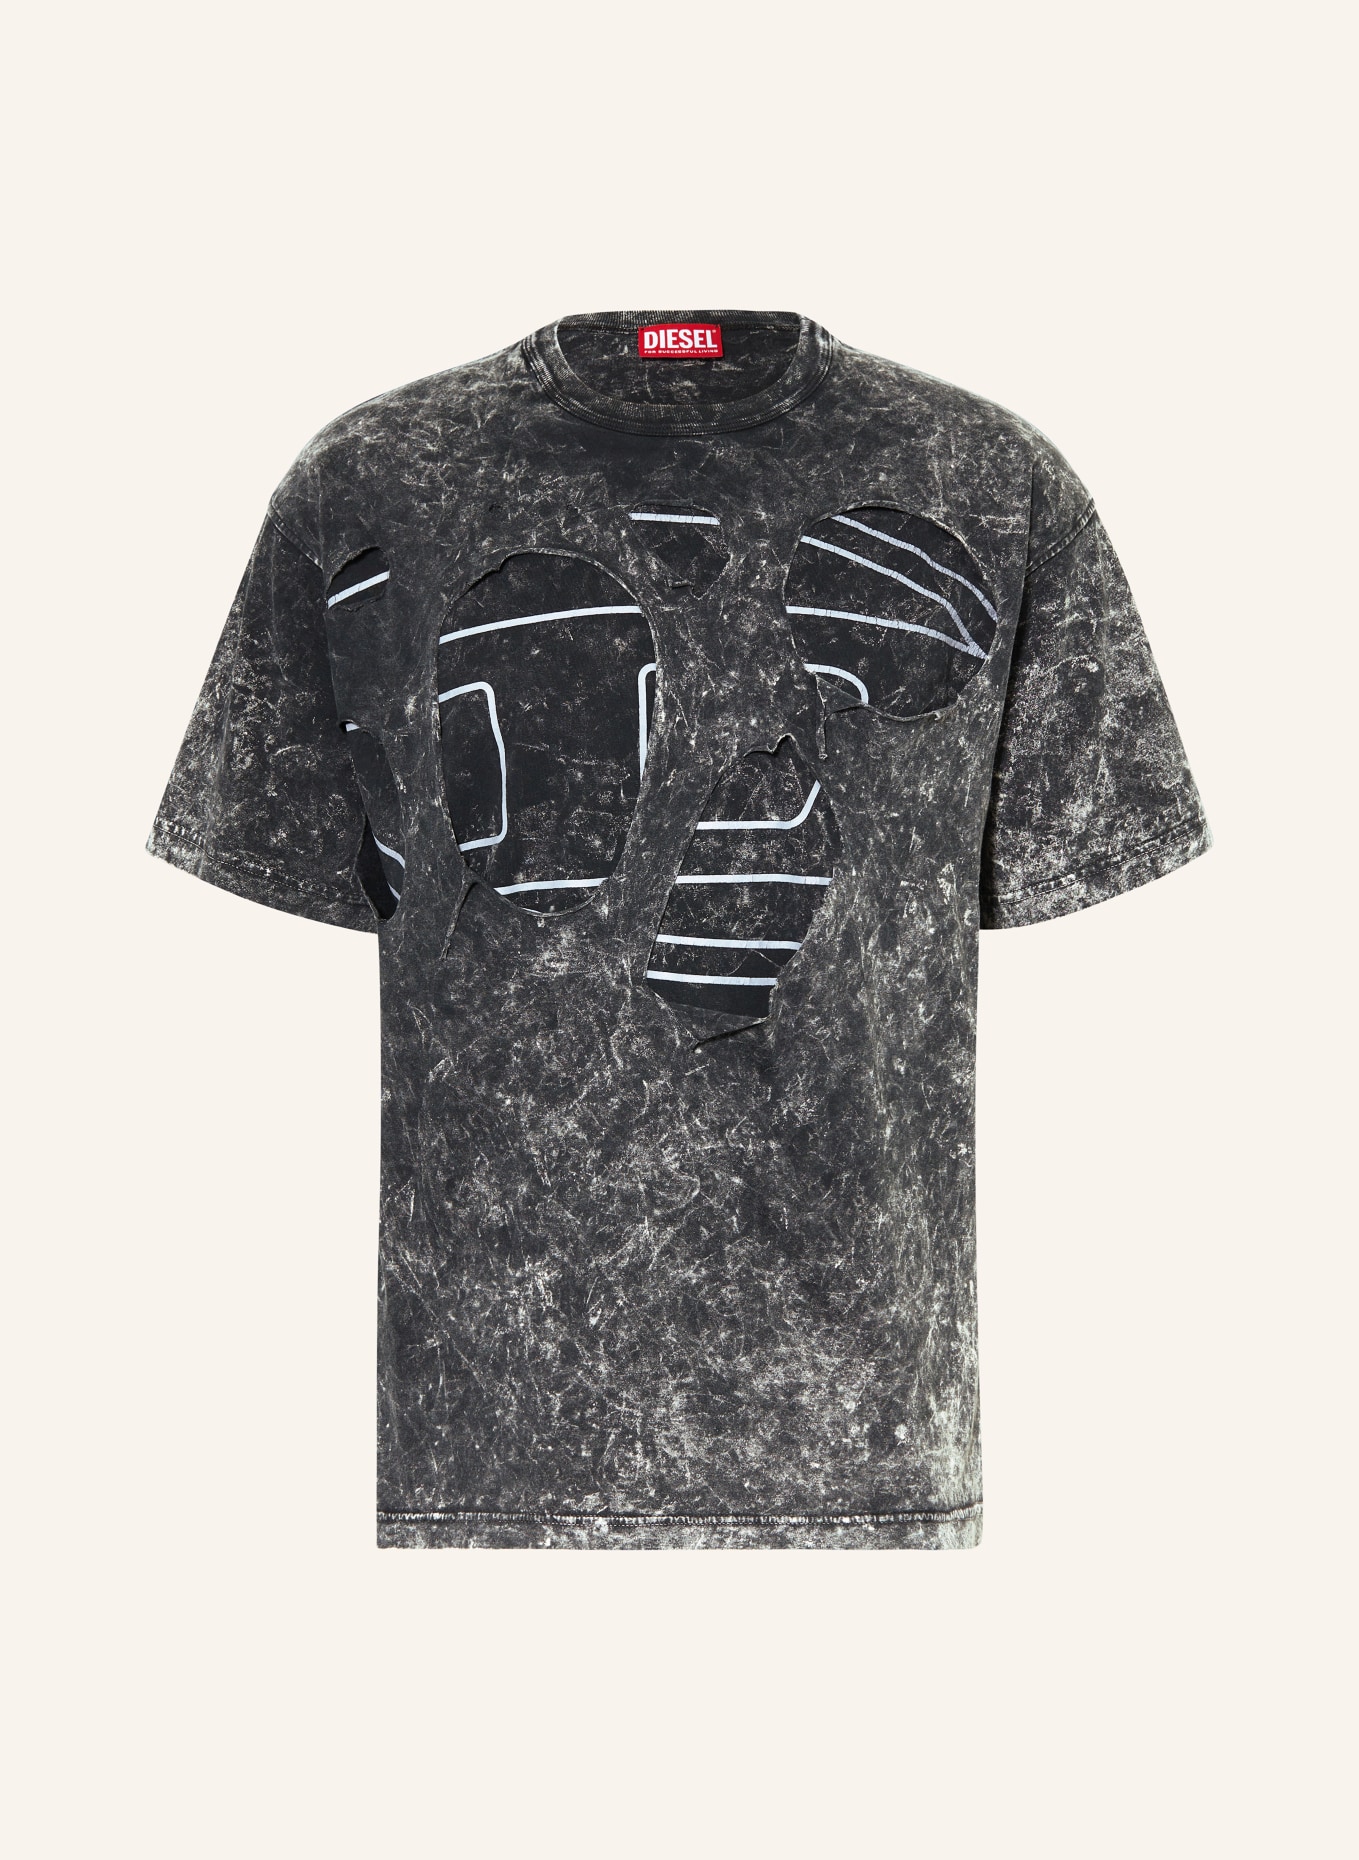 DIESEL T-shirt T-BOXT-PEELOVAL with cut-out, Color: BLACK (Image 1)